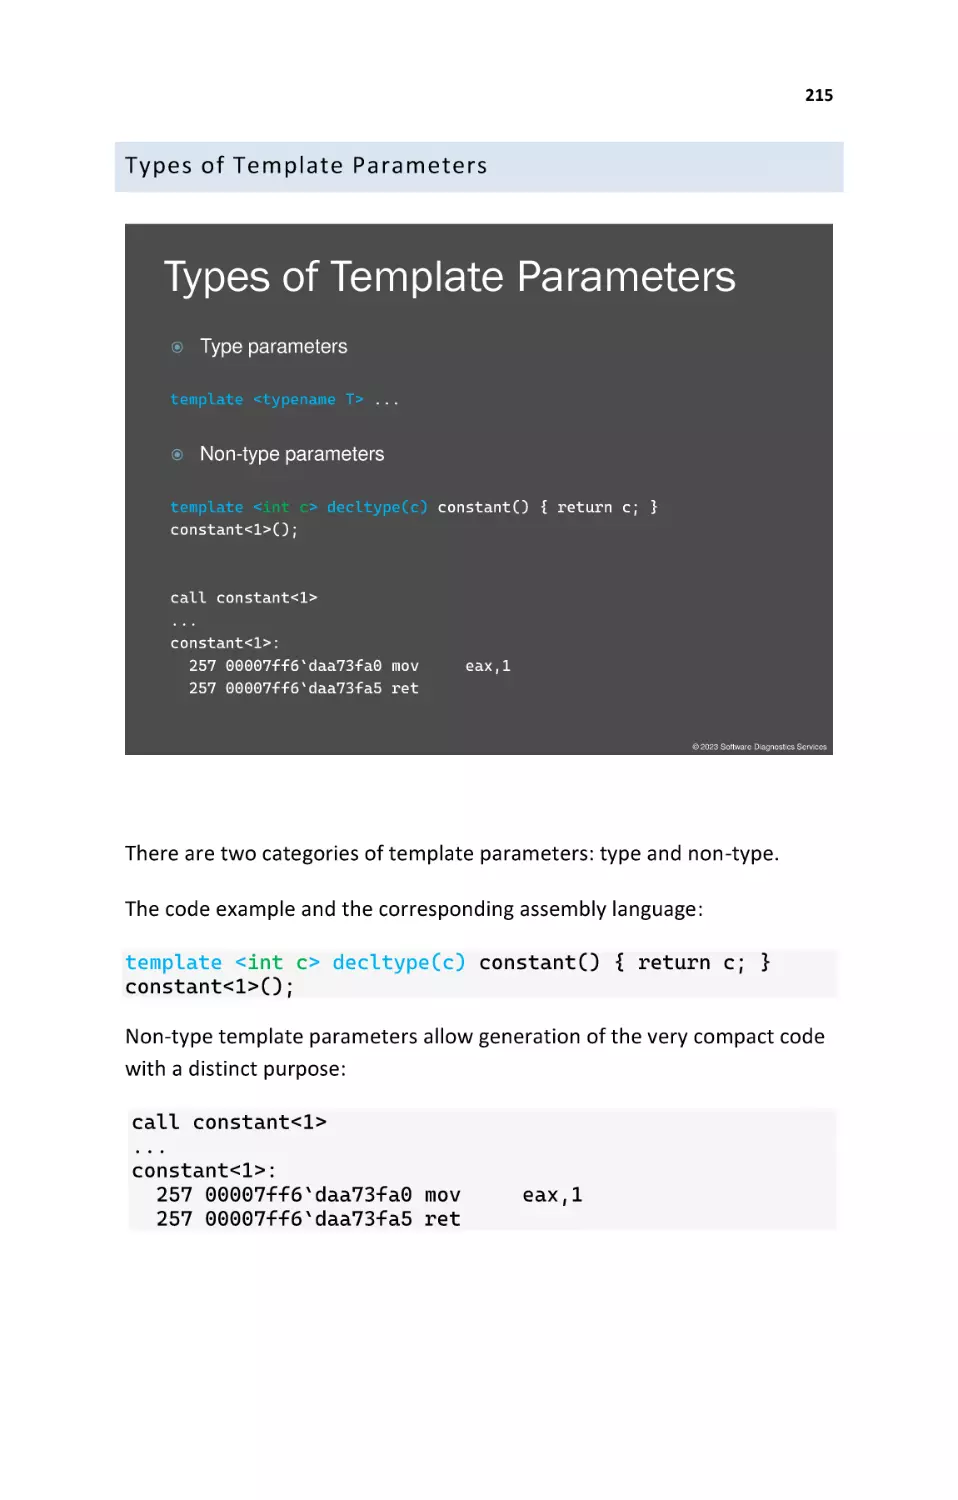 Types of Template Parameters